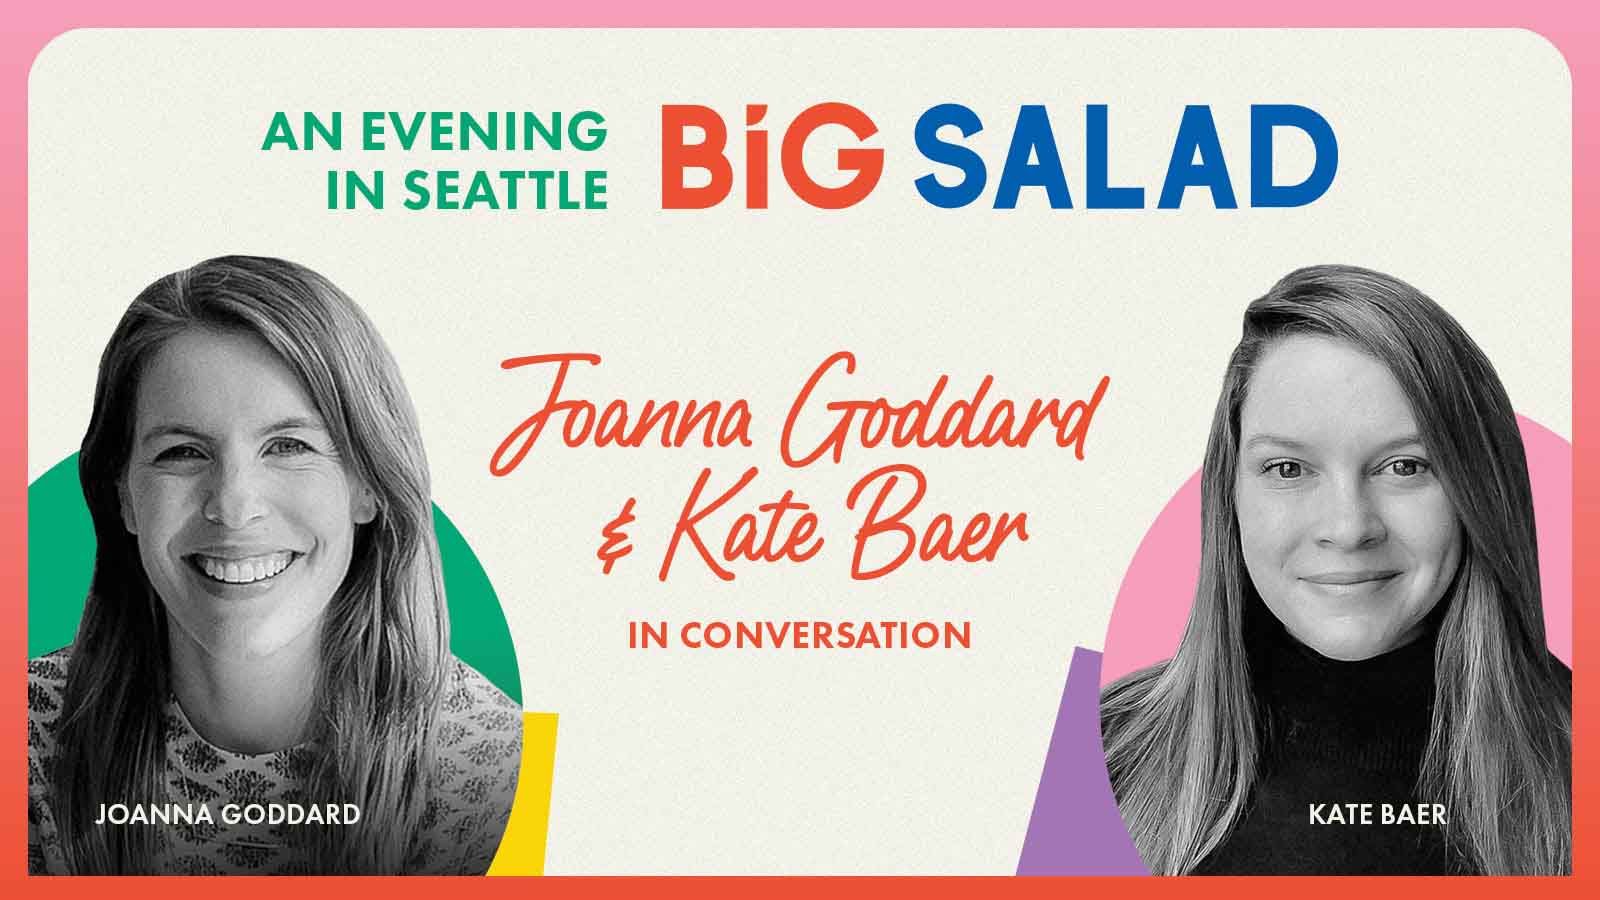 Big Salad comes to Seattle